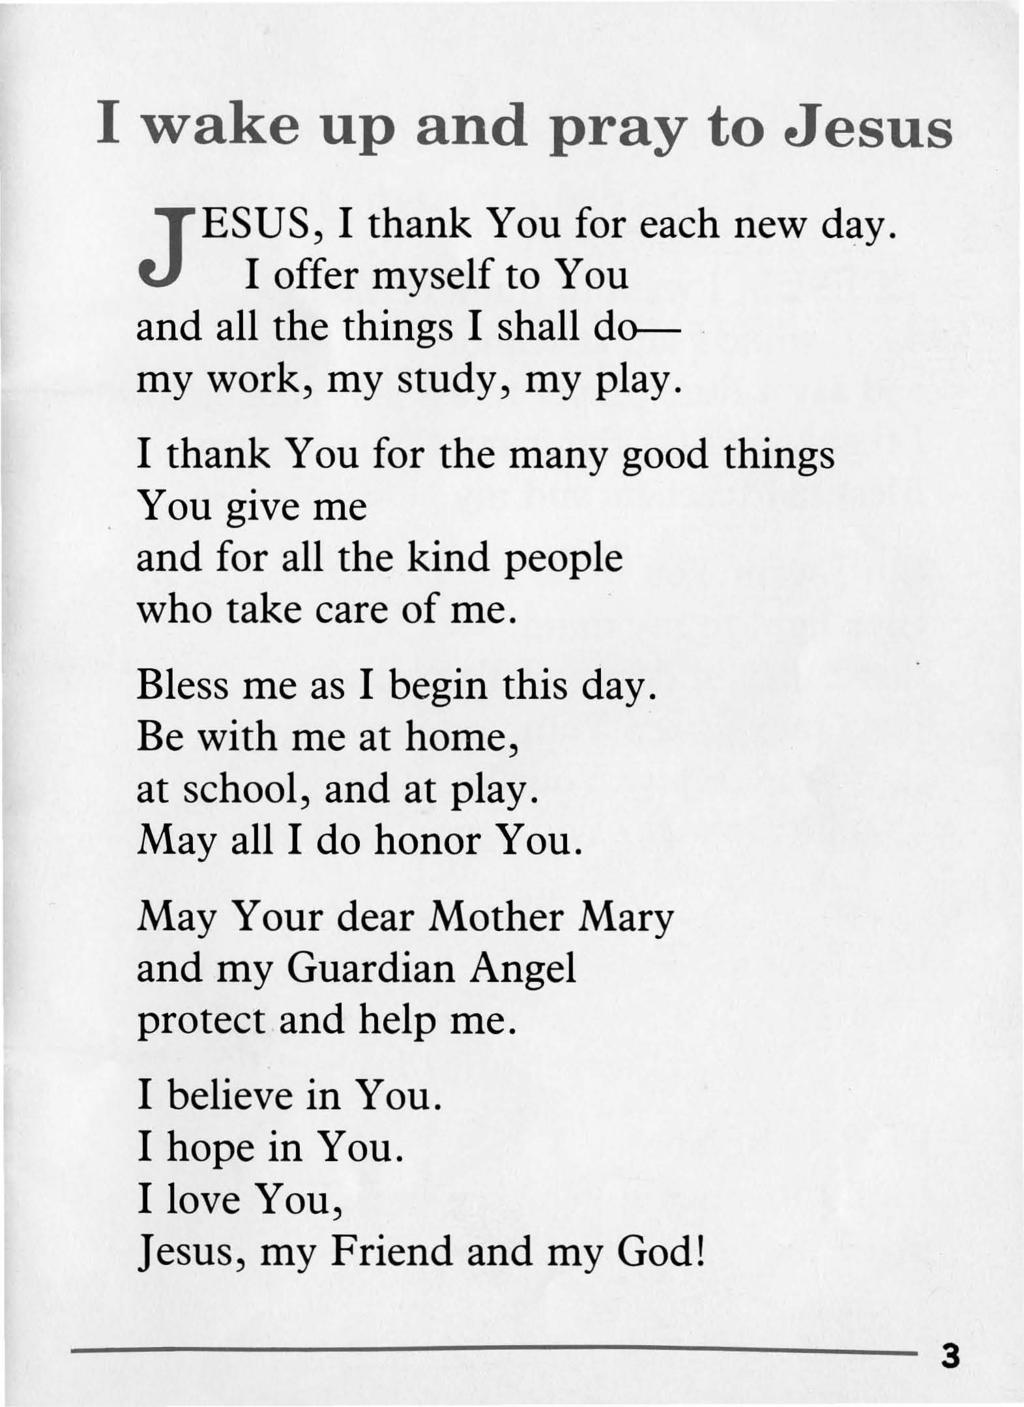 I wake up and pray to Jesus J ESUS, I thank You for each new day. I offer myself to You and all the things I shall do-. my work, my study, my play.